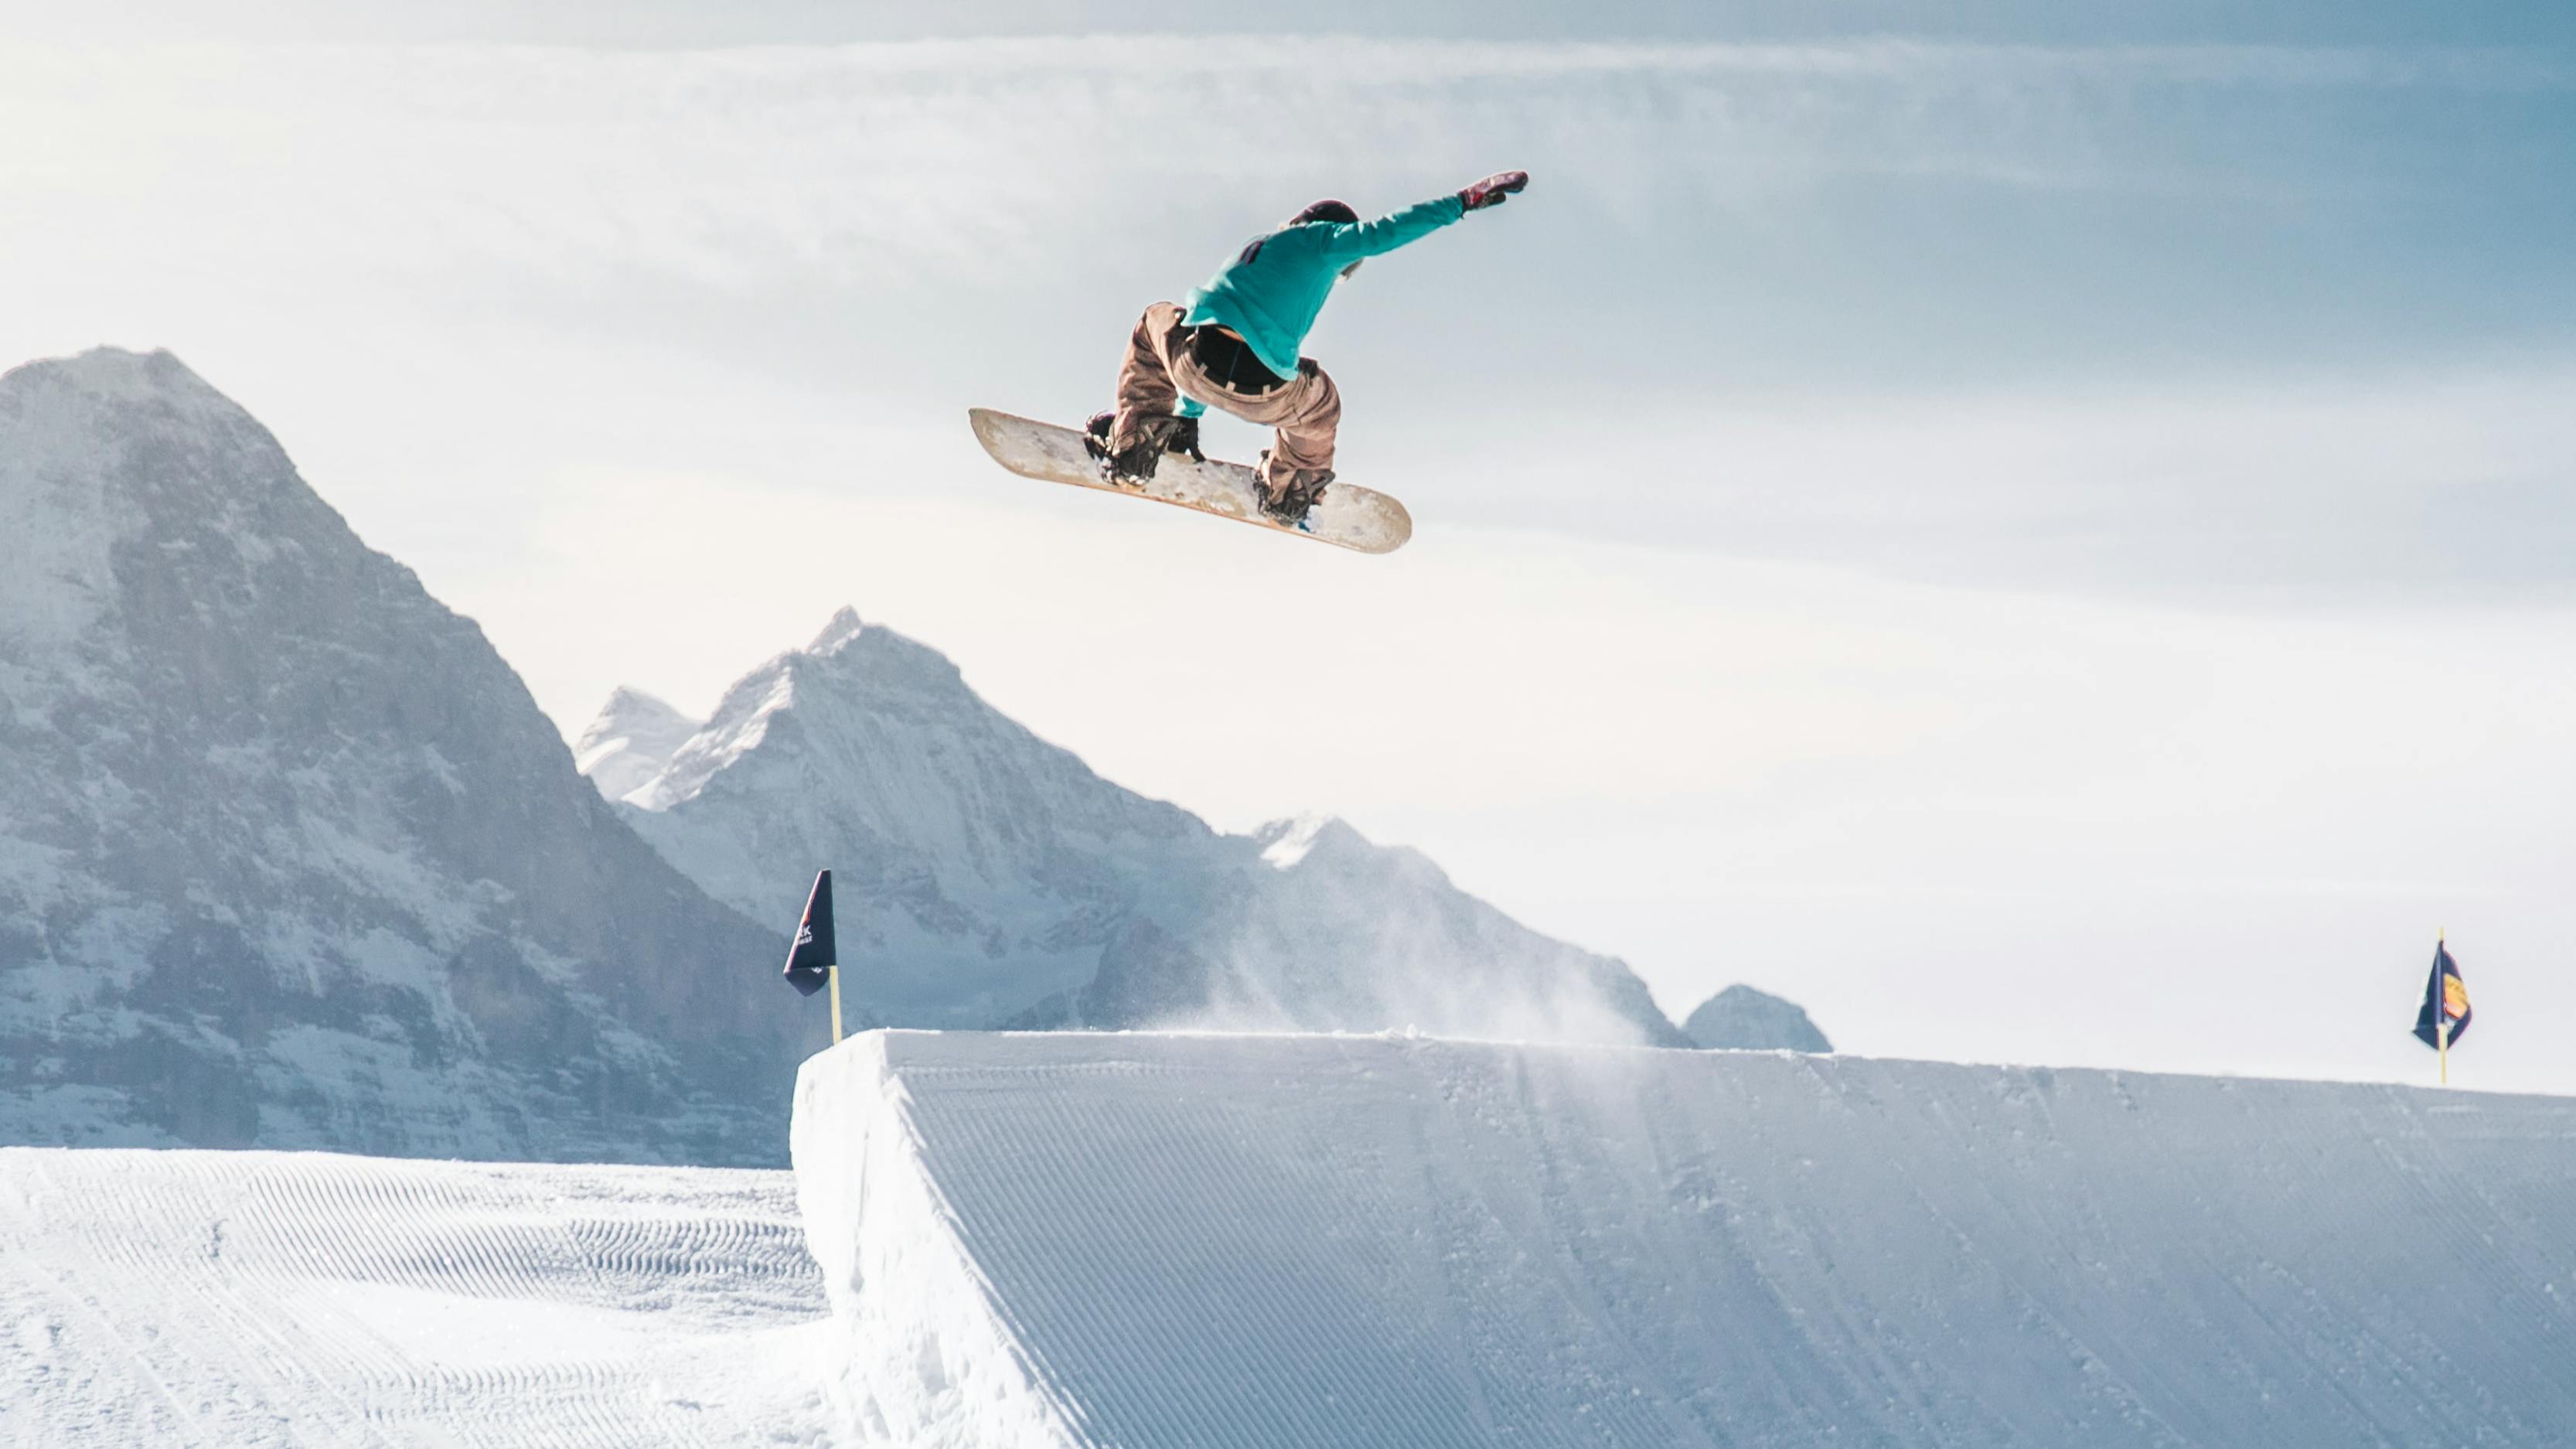 Picture from the Forbes article on Curated in 2021. Picture courtesy of Snowboard Expert Mick O'Hare.